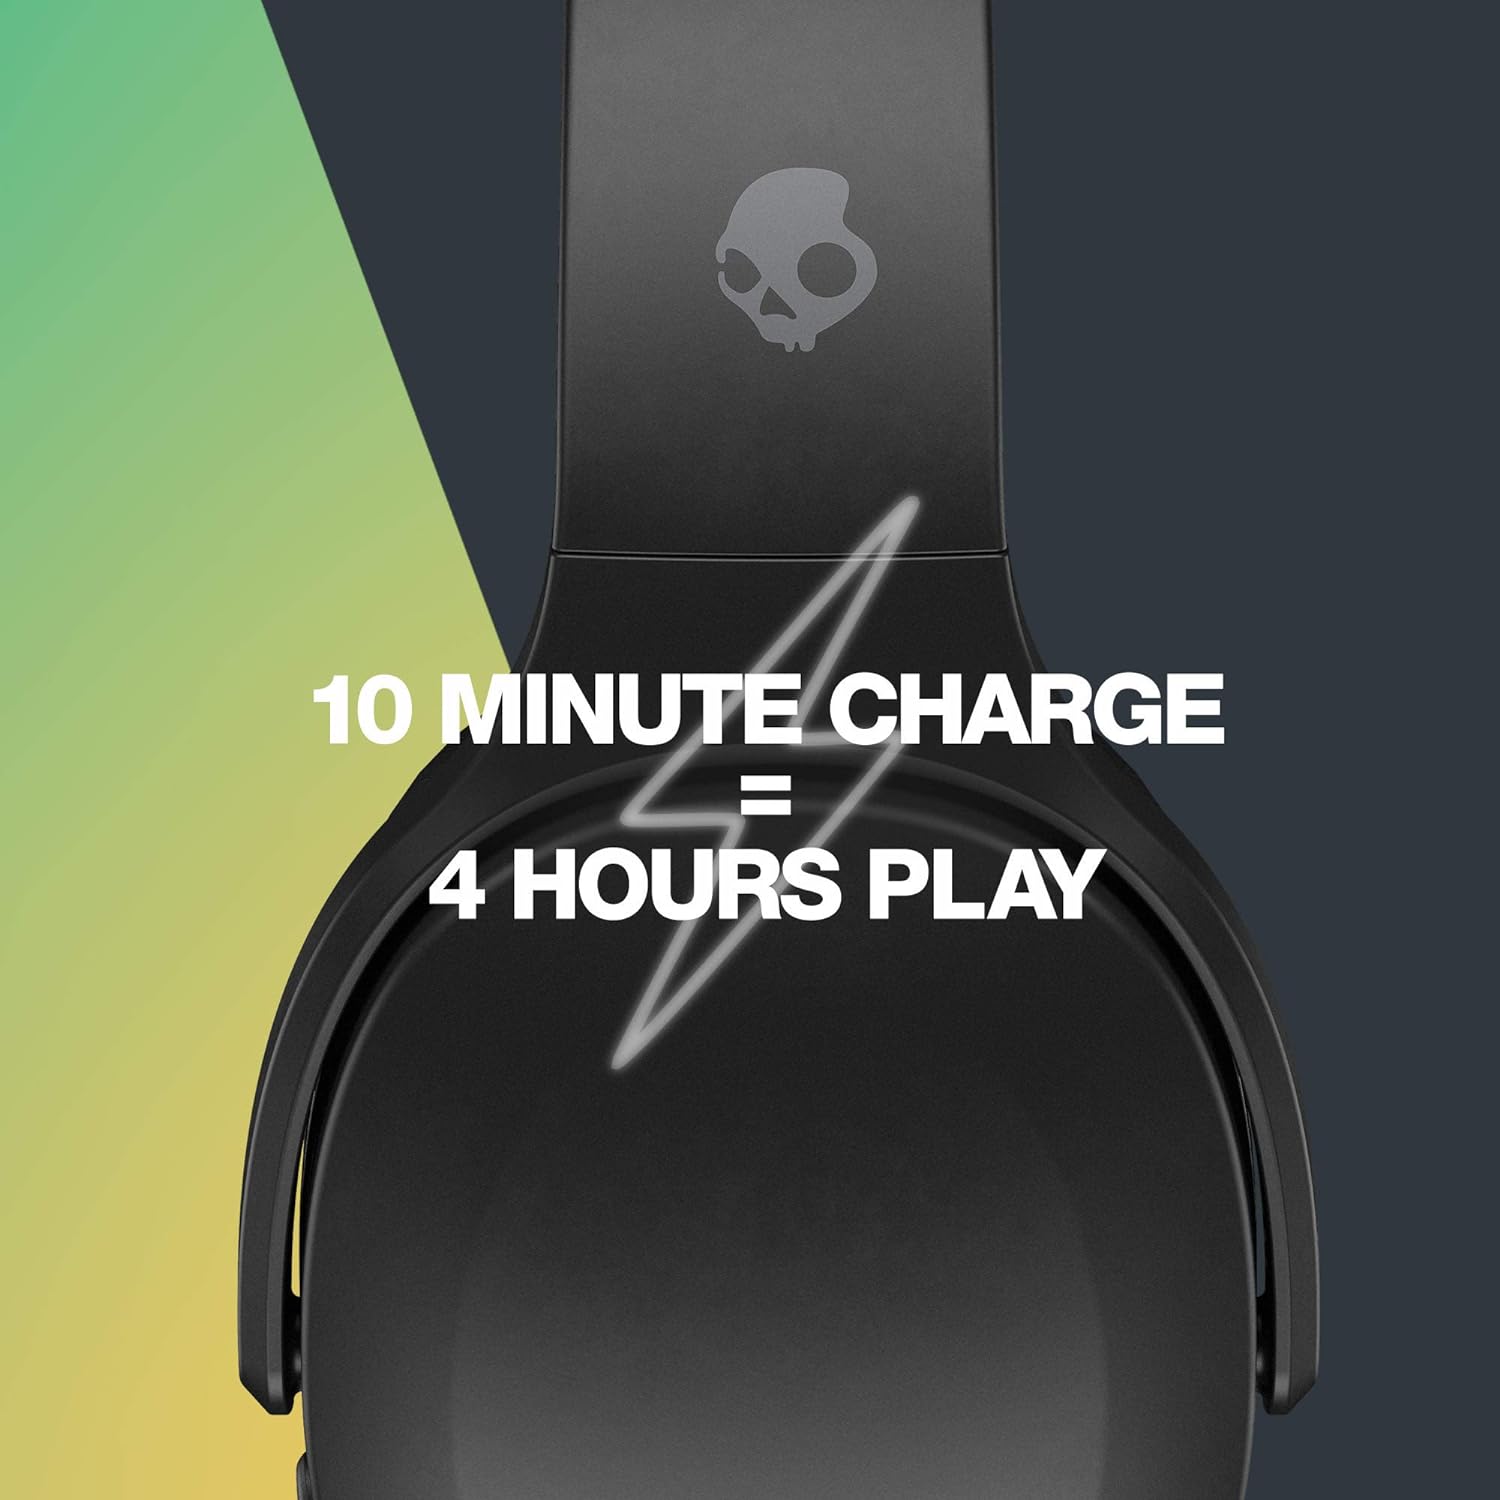 (Open Box) Skullcandy Crusher Evo Wireless Over-Ear Bluetooth Headphones with Microphone, for iPhone and Android, 40 Hour Battery Life, Extra Bass Tech - Bonus Line USB-C Cable -Black (Grade - A+)